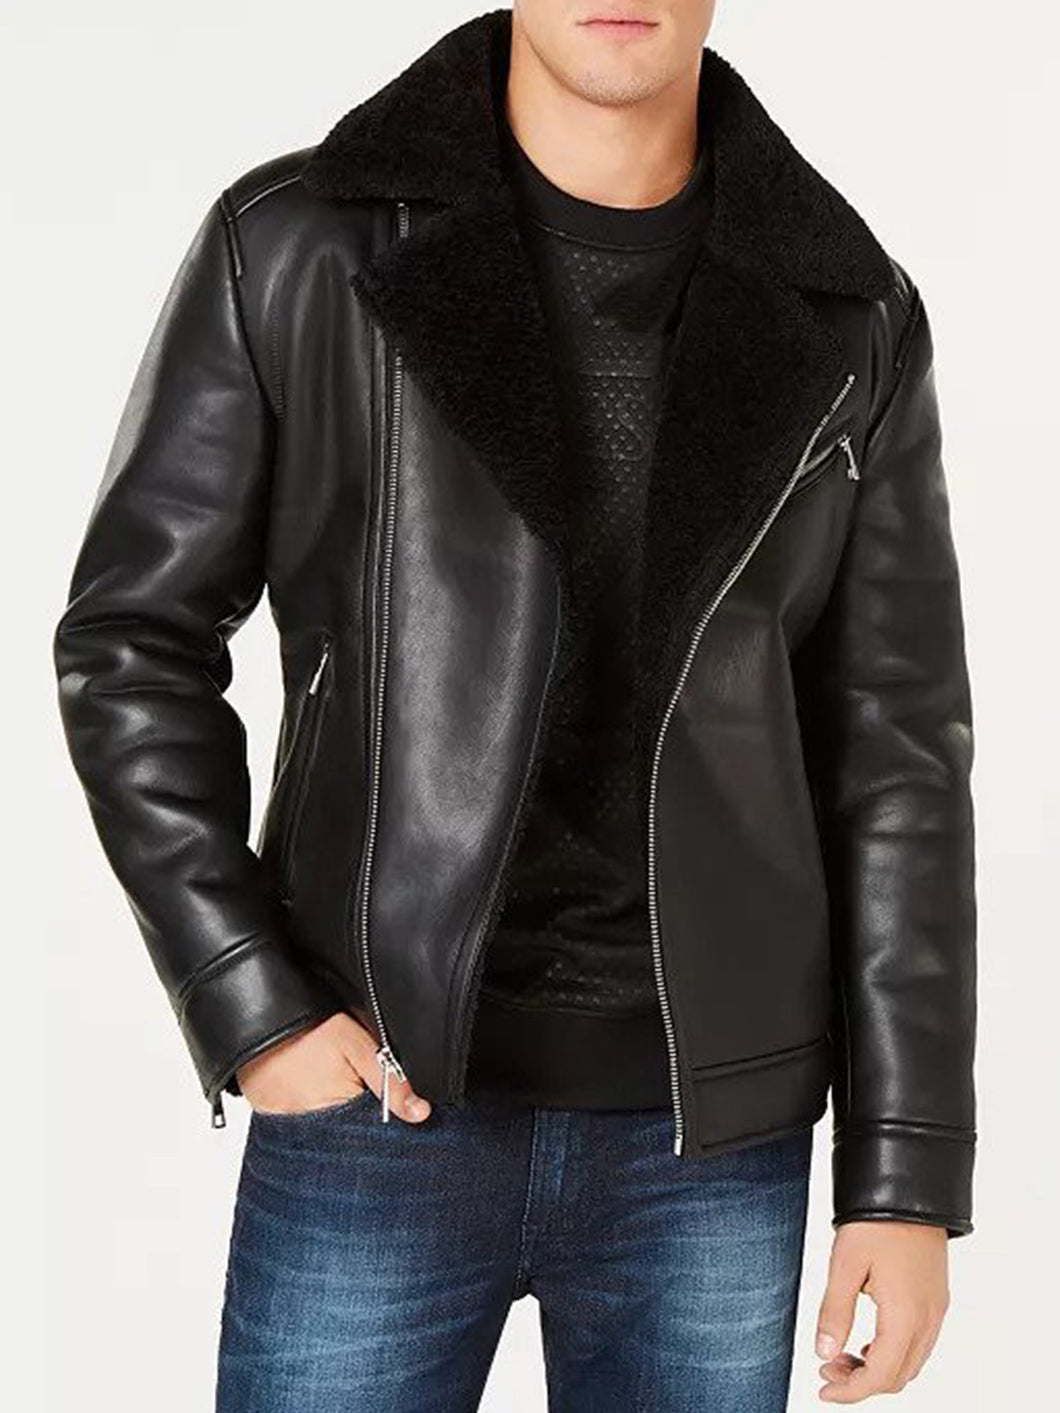 Mens Shearling Black Faux Leather Leather Jacket